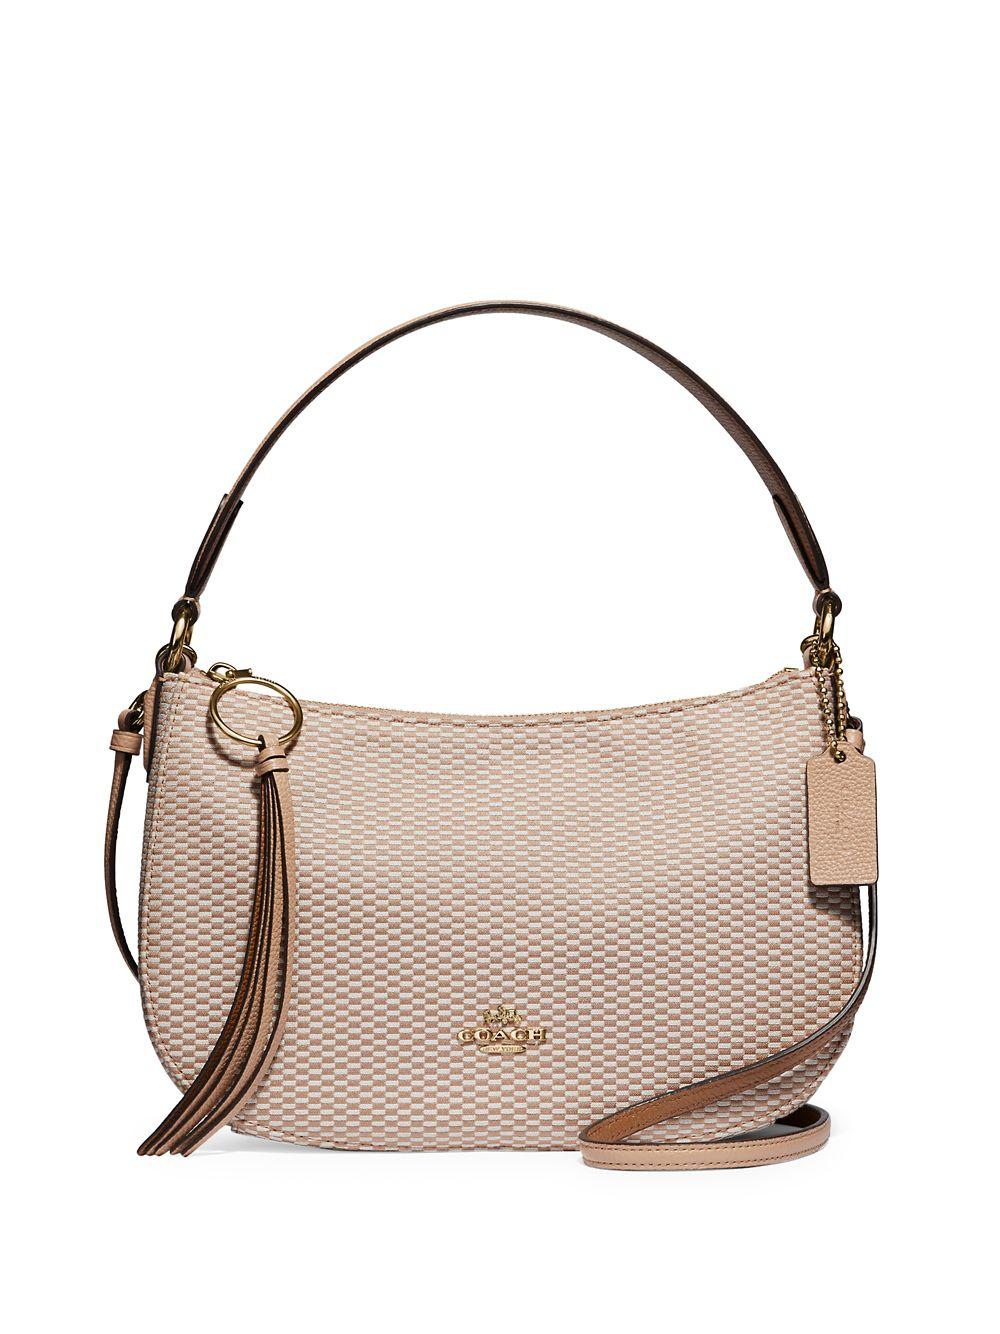 COACH Sutton Legacy-print Leather Crossbody Bag in Natural - Lyst